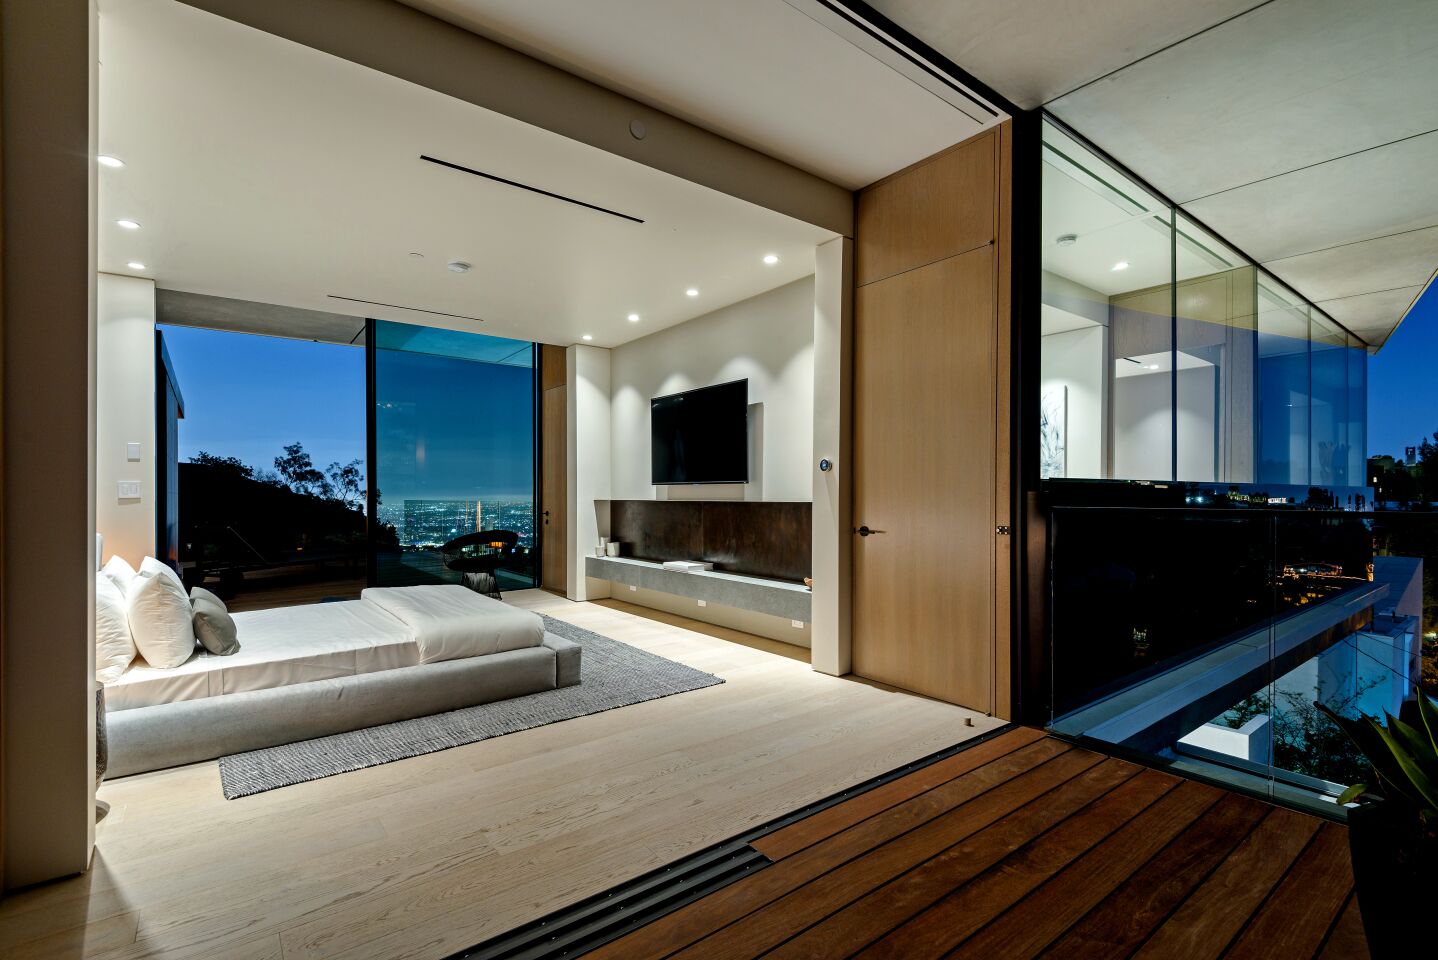 NBA player Parsons has room to stretch out in the house, which has clean lines and a lot of glass.